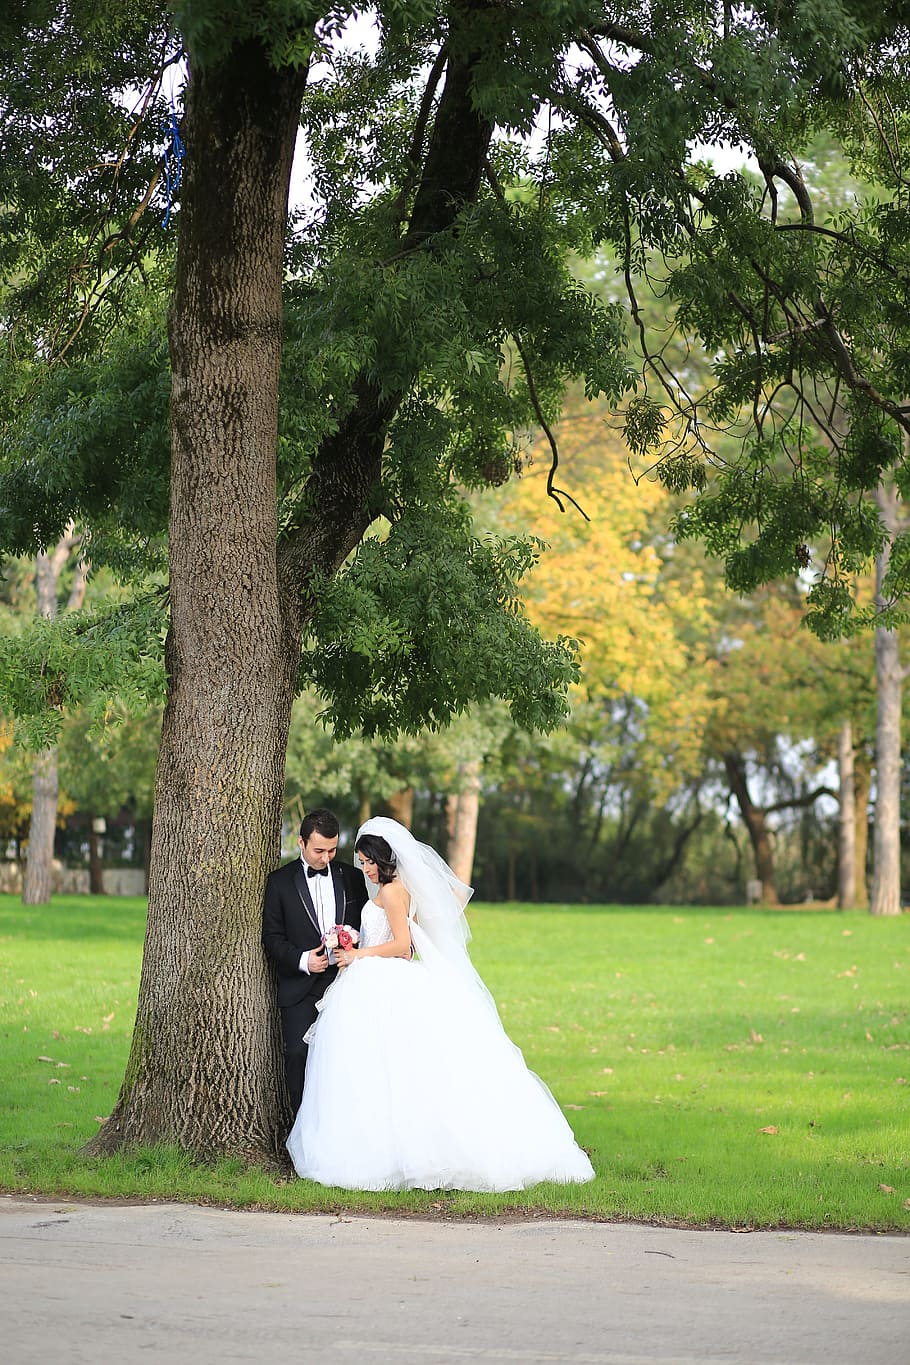 nature, new couple, outdoor photography, wedding photography, wedding, bride, newlywed, plant, tree, wedding dress